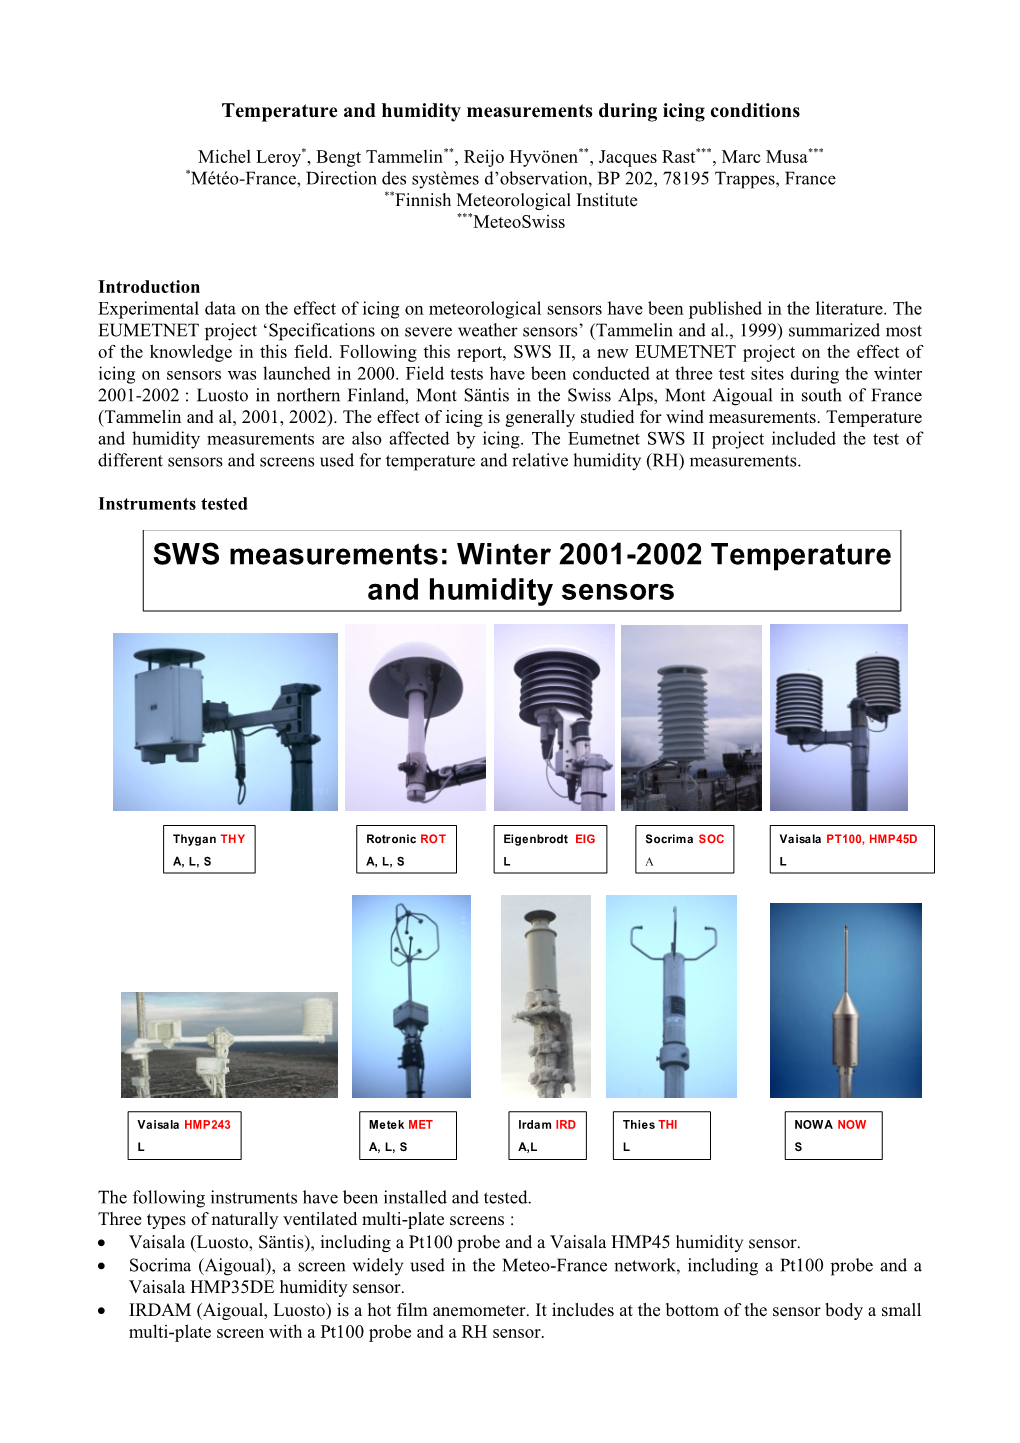 Temperature and Humidity Measurements During Icing Conditions